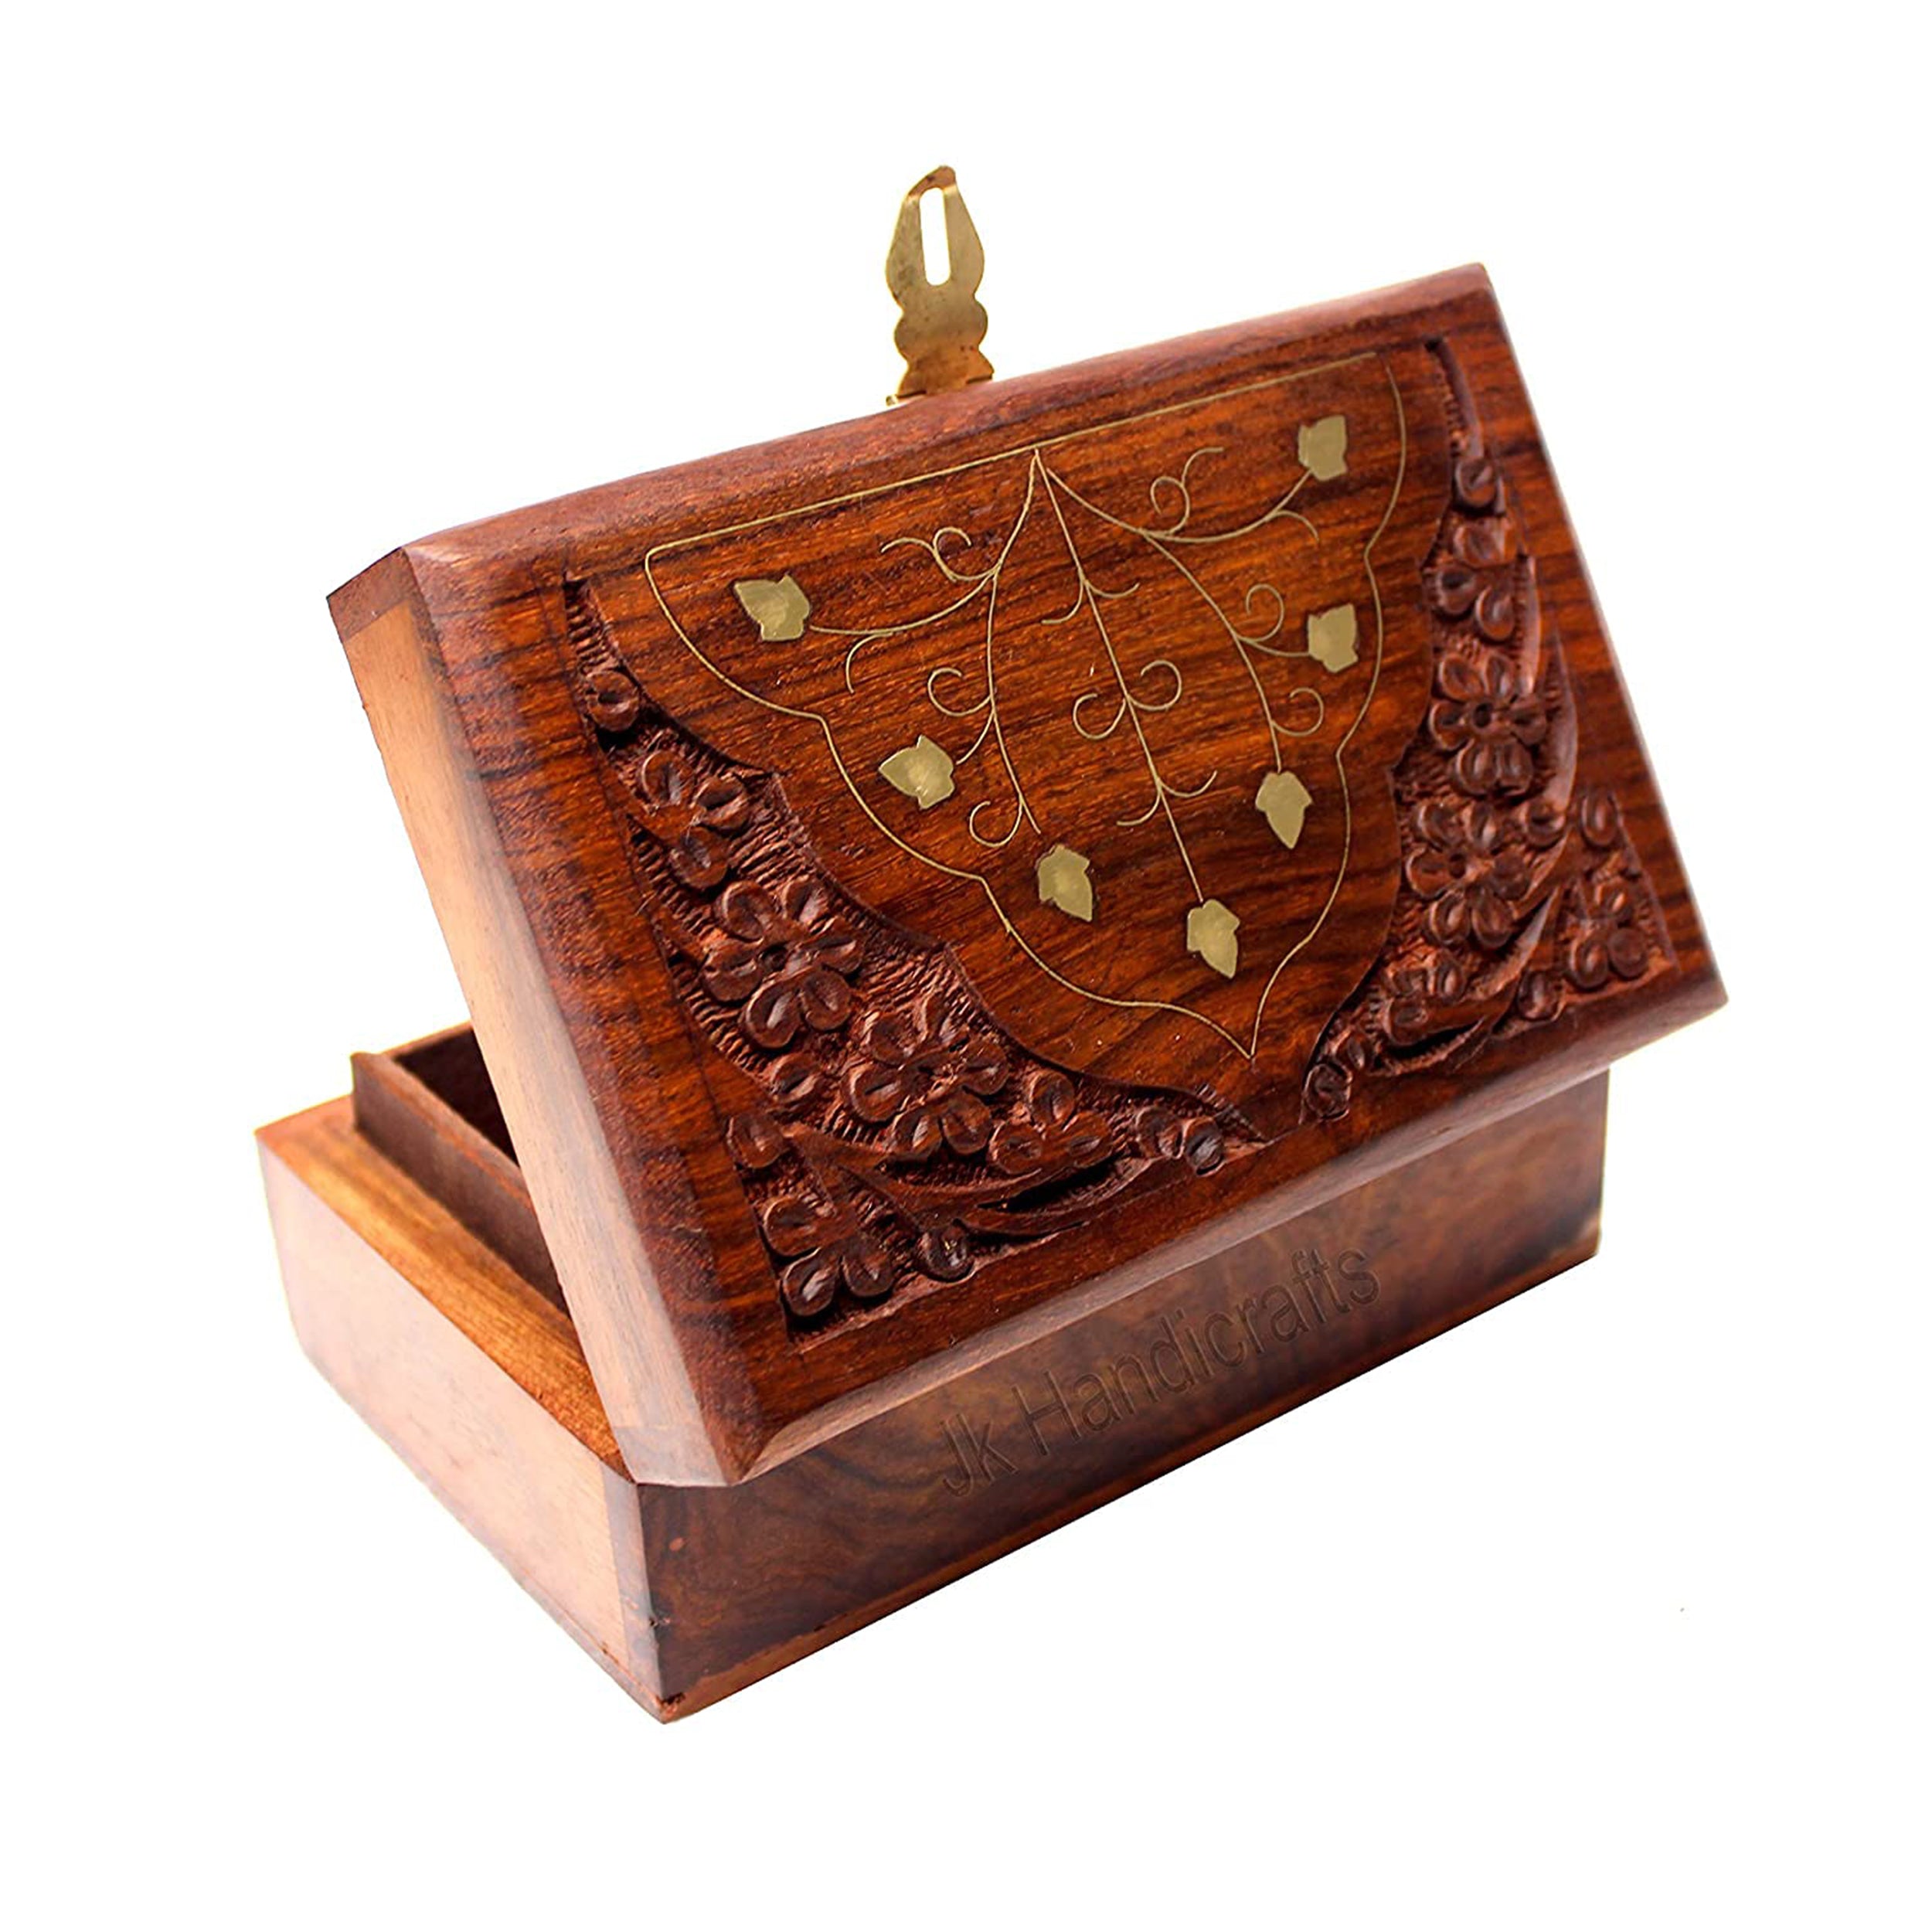 Handcrafted Wooden Box with Brass-Filled Lid - Perfect for Storing Your Jewelry